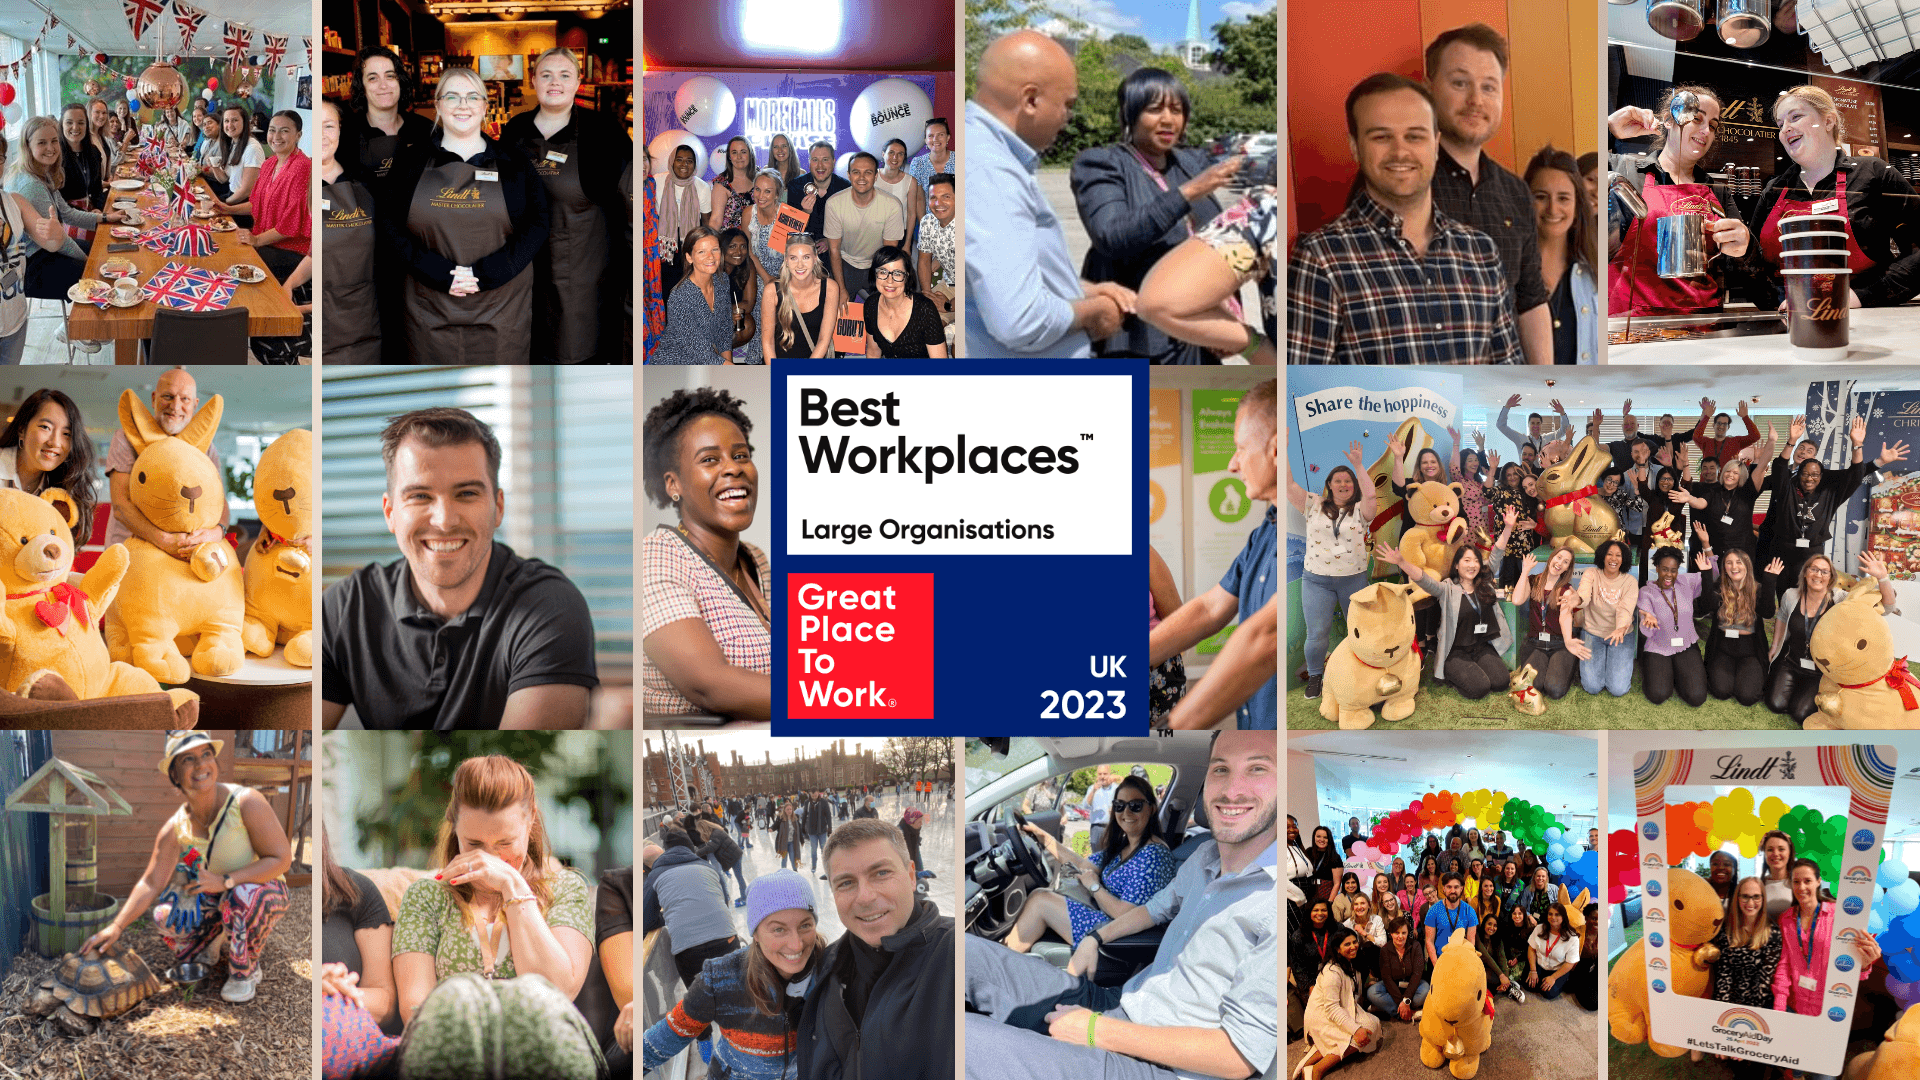 2023 Best Workplaces Large Organisations - Great Place To Work